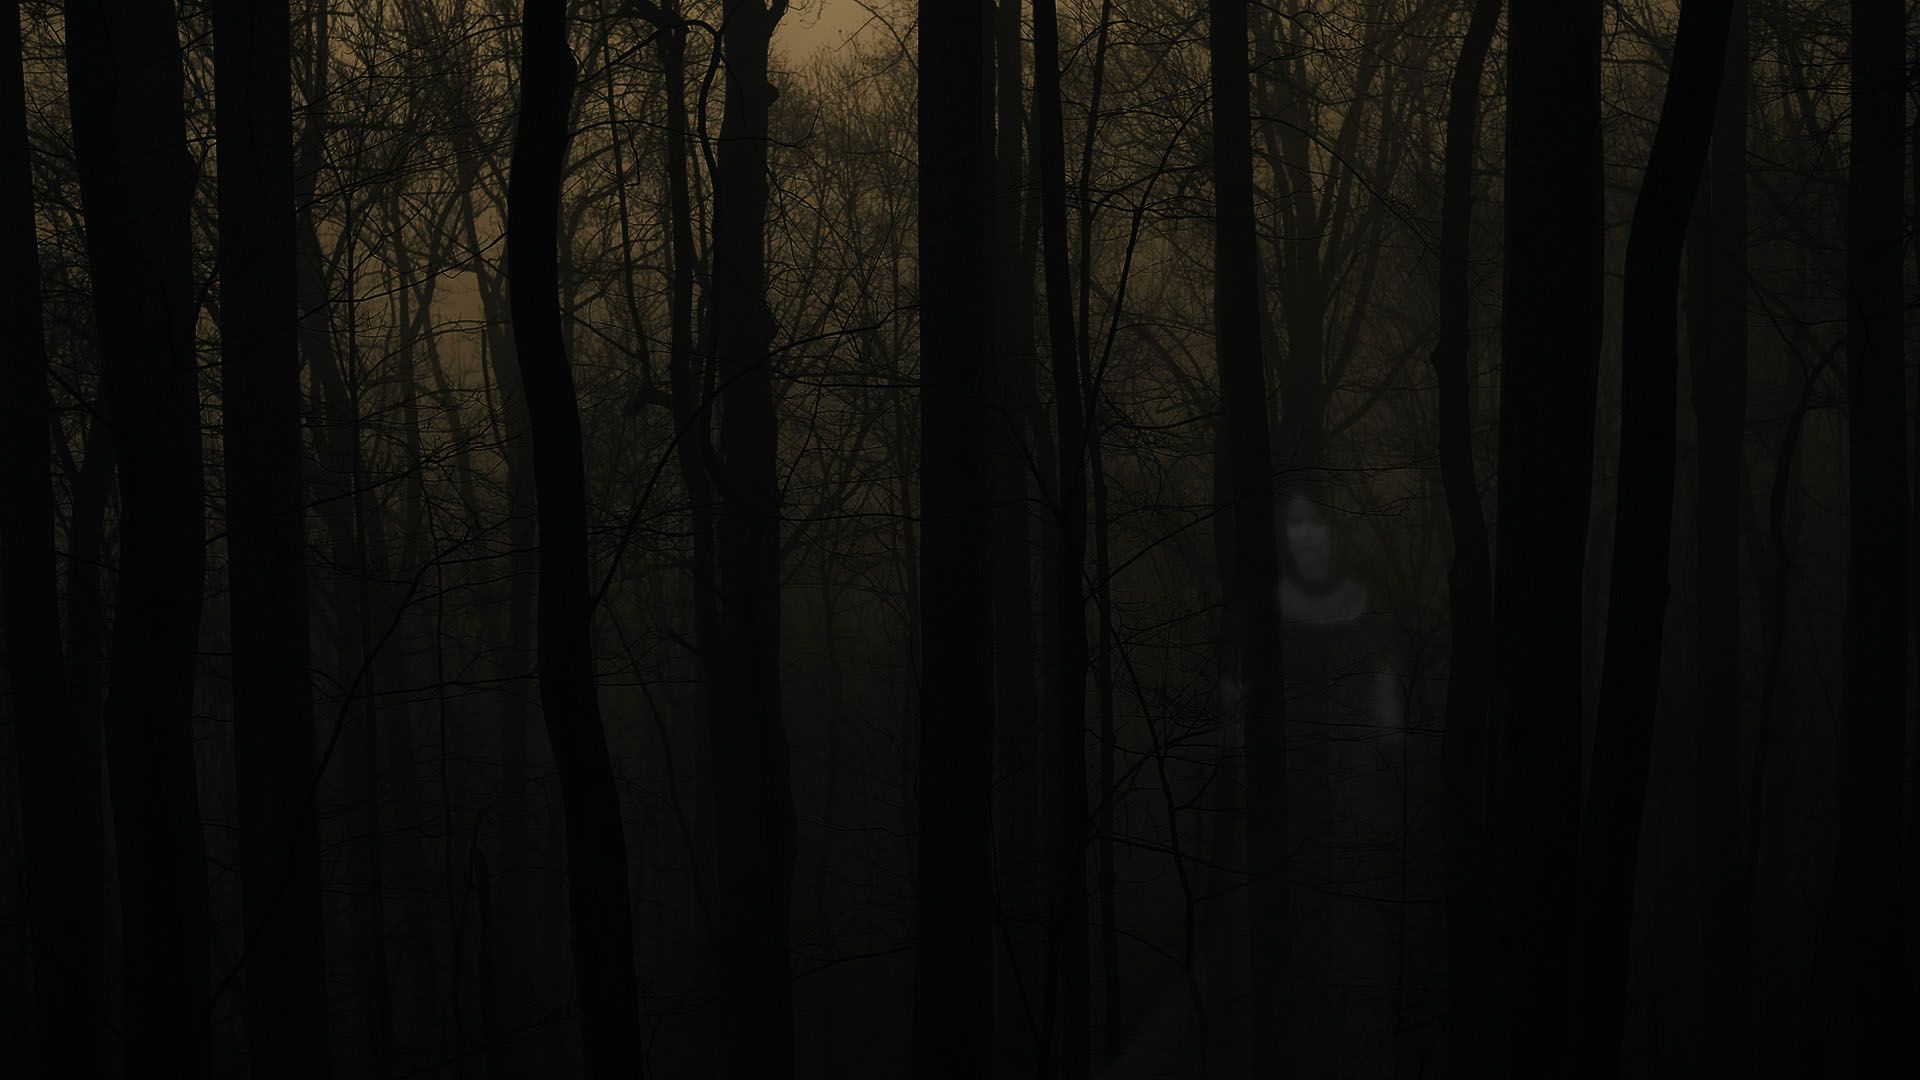 The forest at night, with a figure standing in the distance. - Creepy